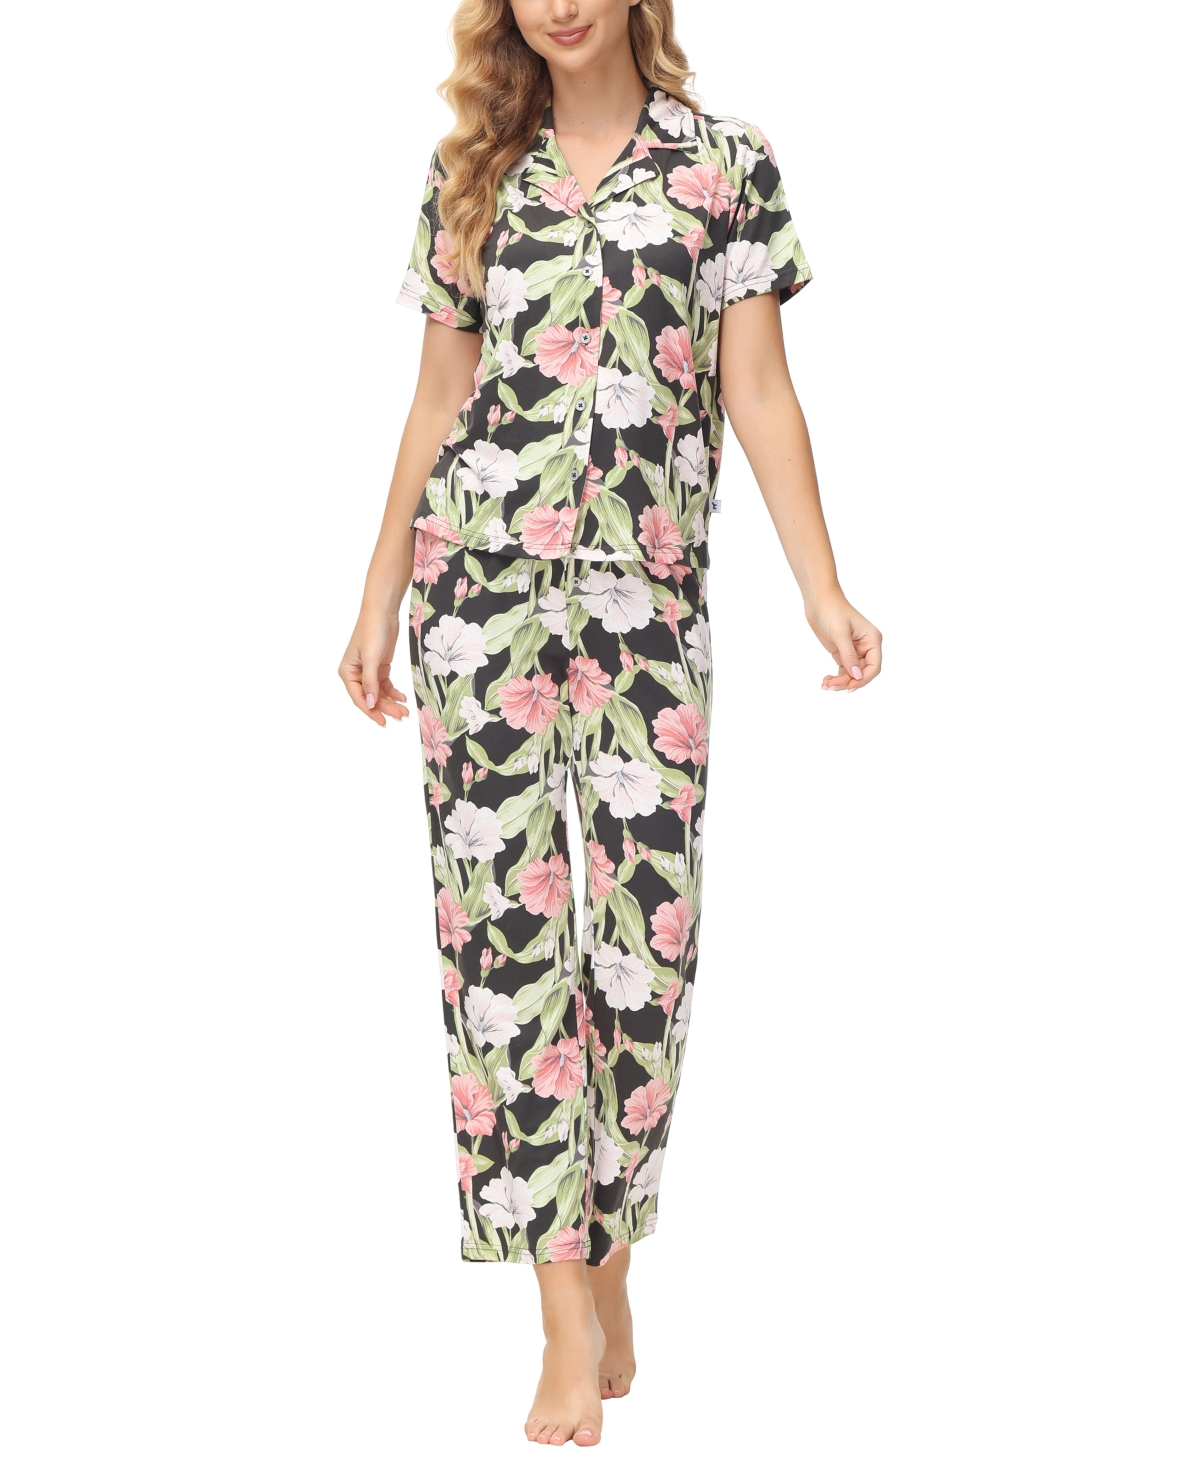 Women's 2 Piece Printed Short Sleeve Notch Top with Pants Pajama Set - Bayview Floral